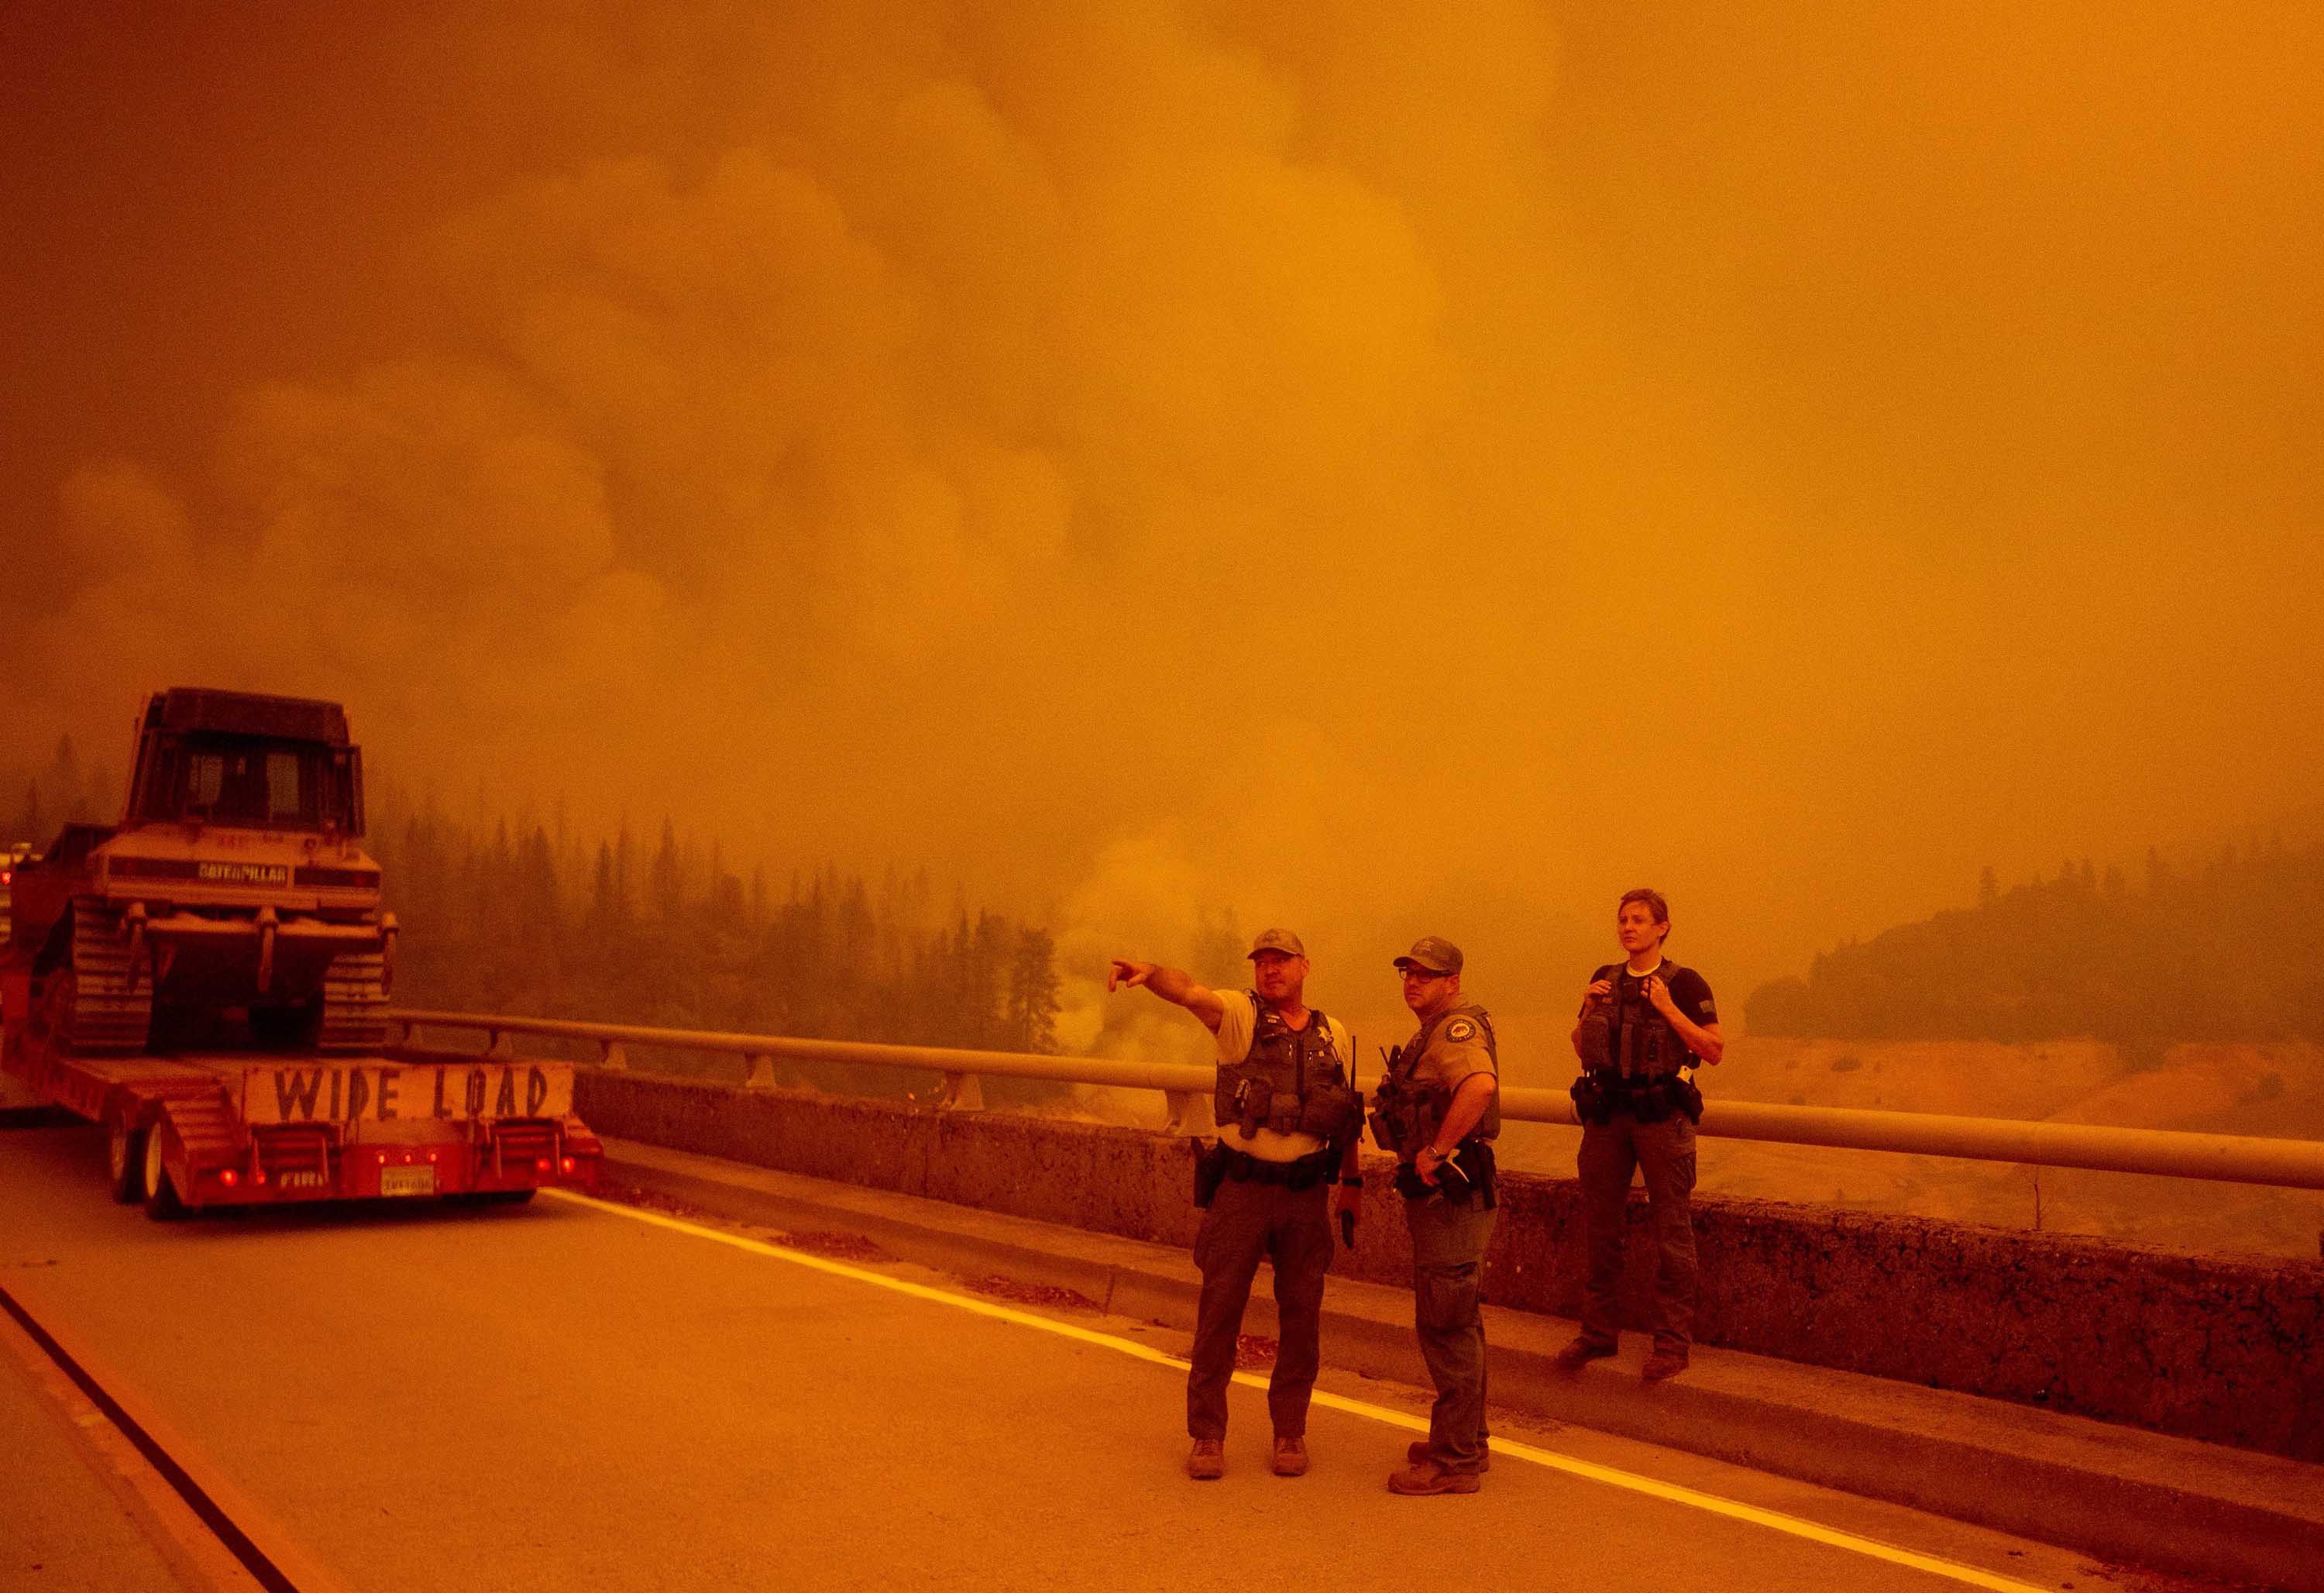 Law enforcement and fire personnel wait to enter an area encroached by fire during the Bear fire, part of the North Lightning Complex fires, in Oroville, California on September 9.